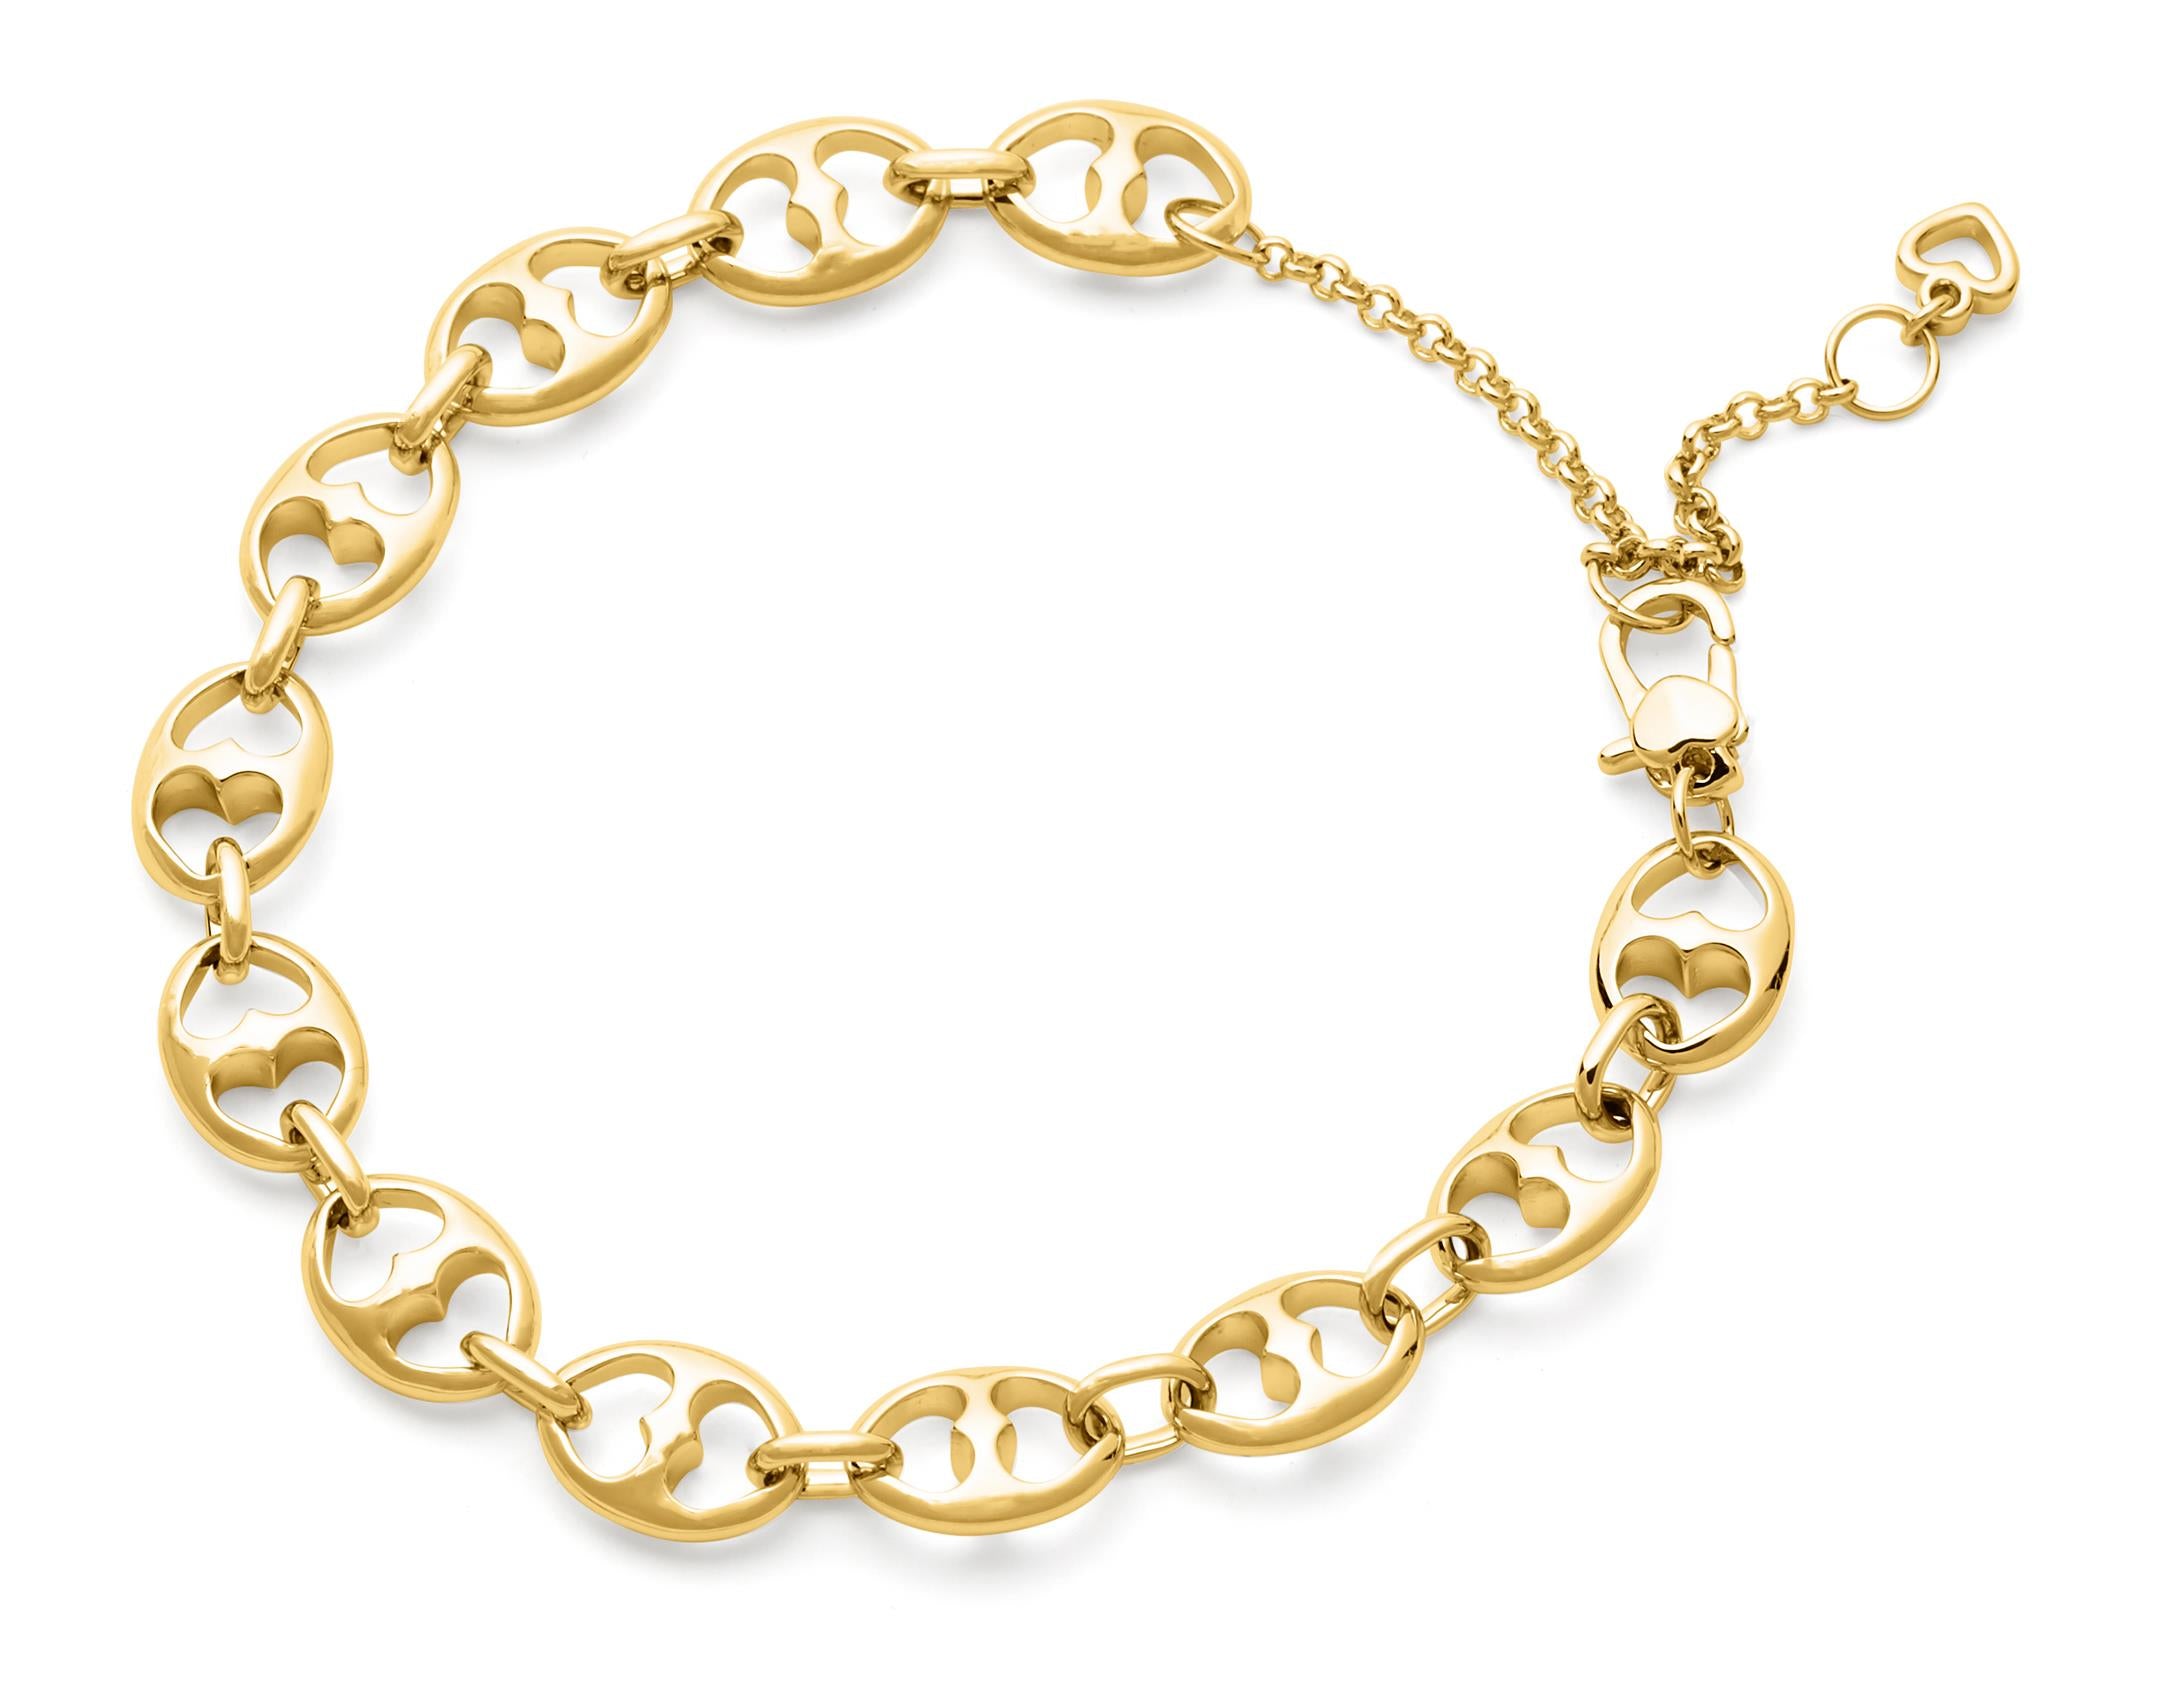 Kate Spade Duo Link Chain Bracelet - Gold